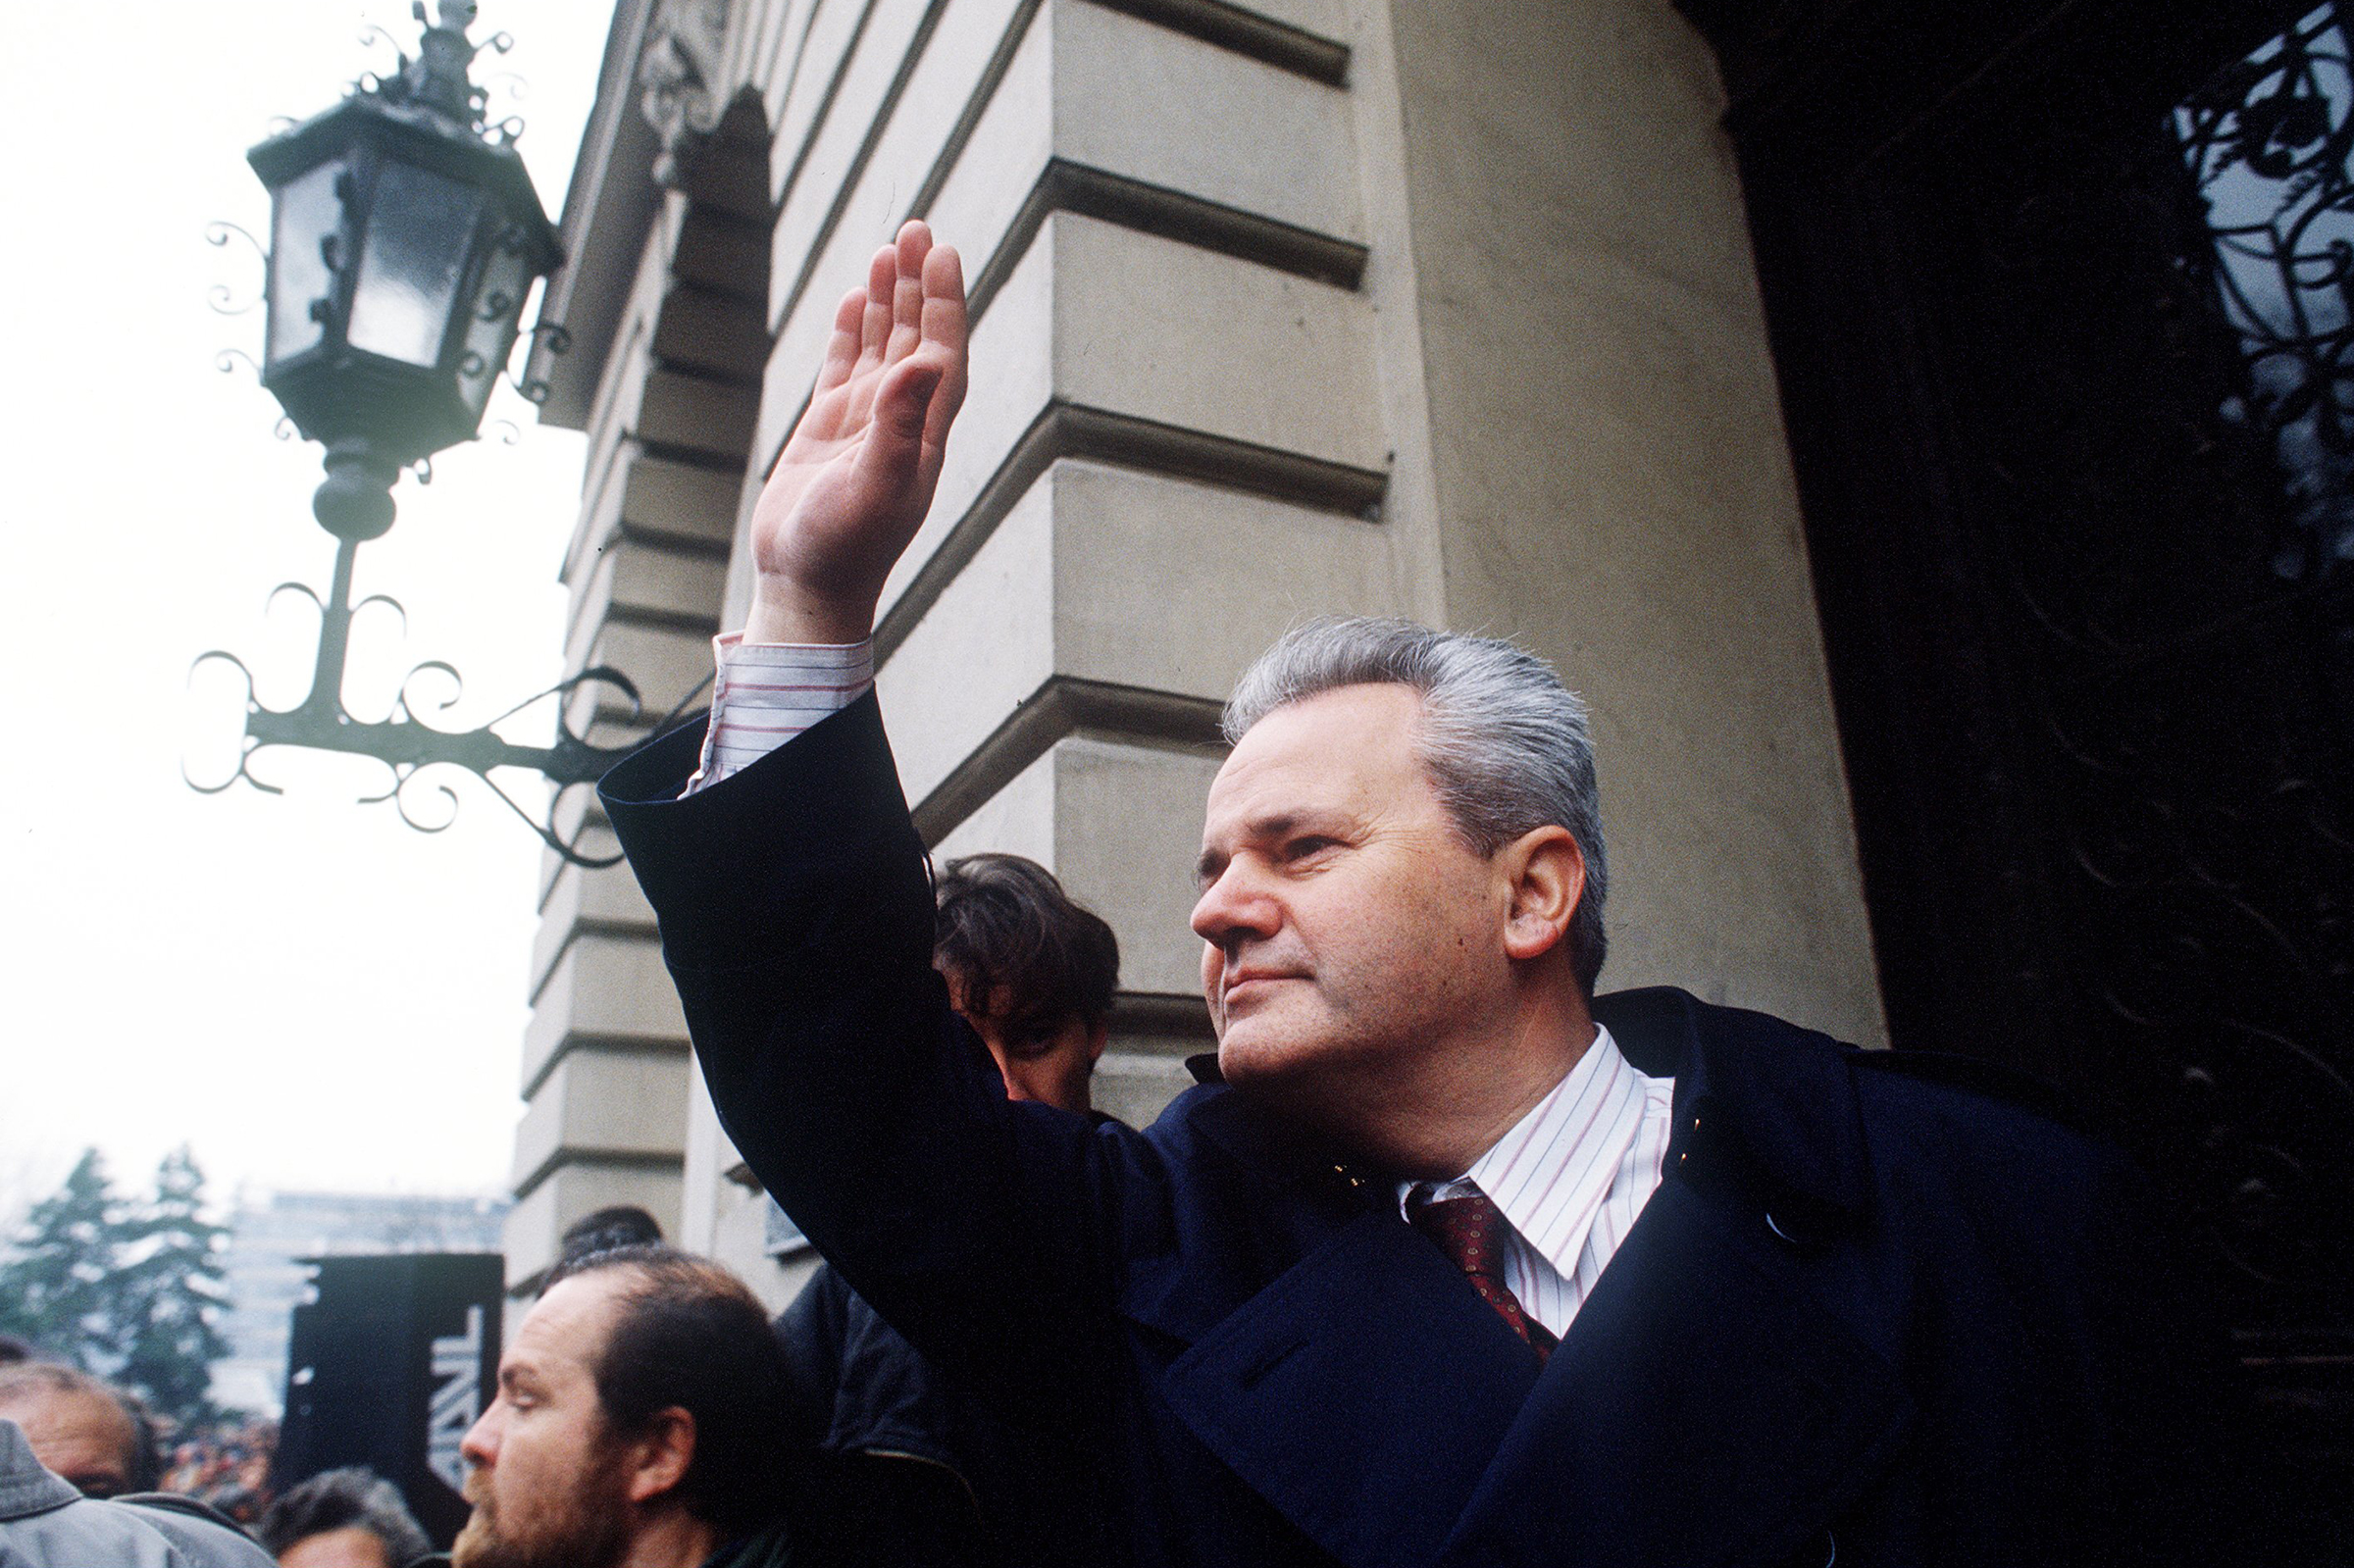 Serbian President, Slobodan Milosevic, campaigning in Krusevac, during the 1992 Serbian general election, December 17, 1992. (Chip Hires—Gamma Rapho/Getty Images)